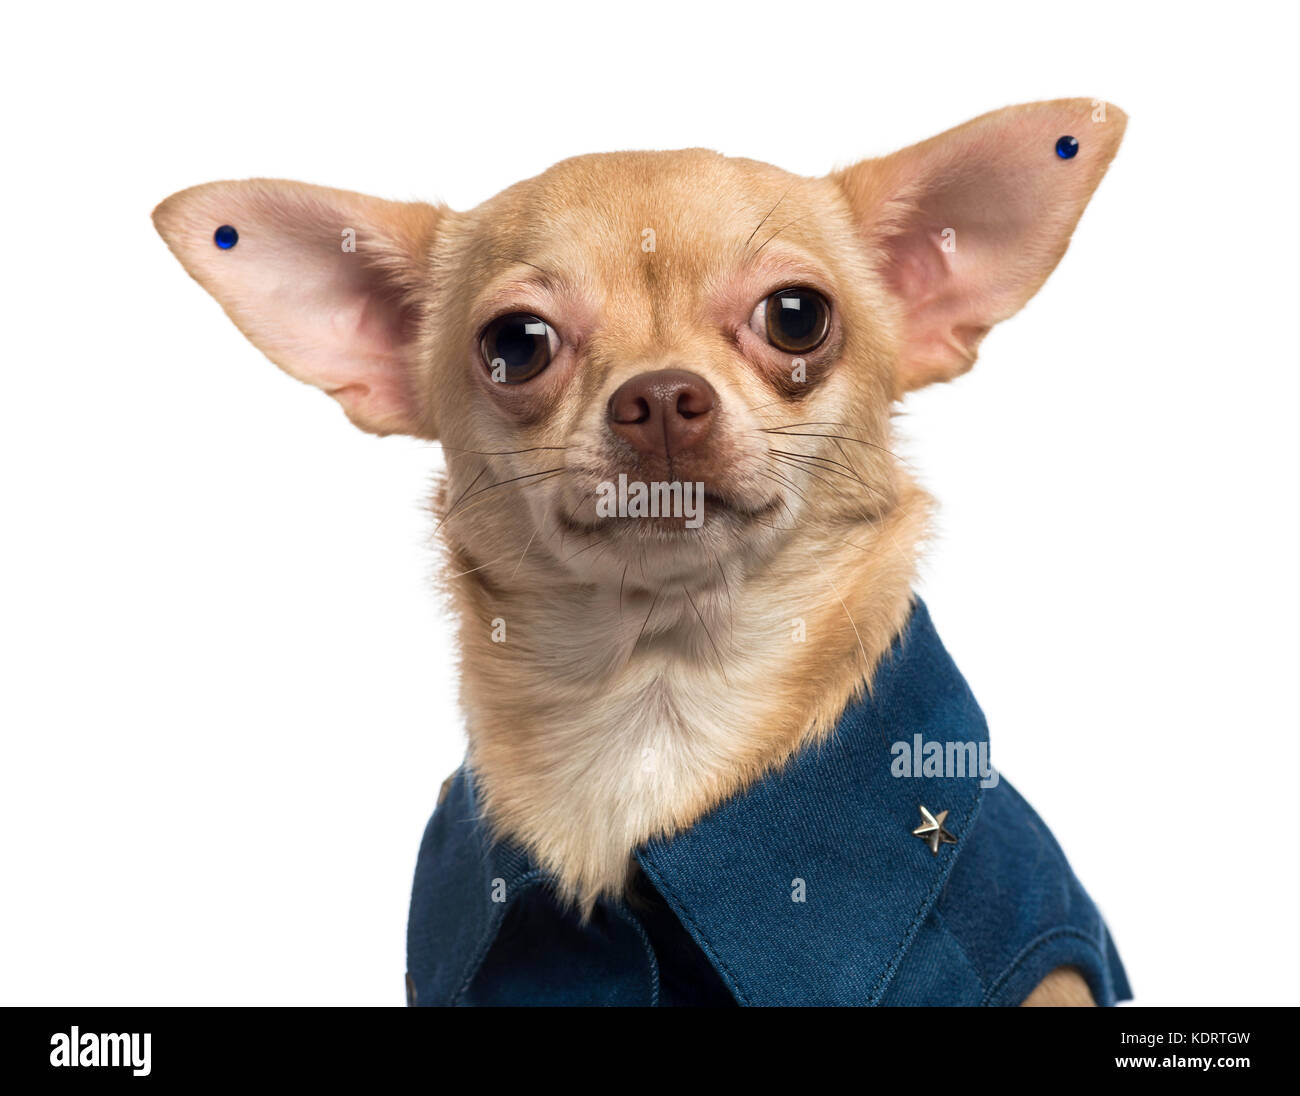 Close-up of a dressed-up Chihuahua wearing earrings, looking at the camera, isolated on white Stock Photo